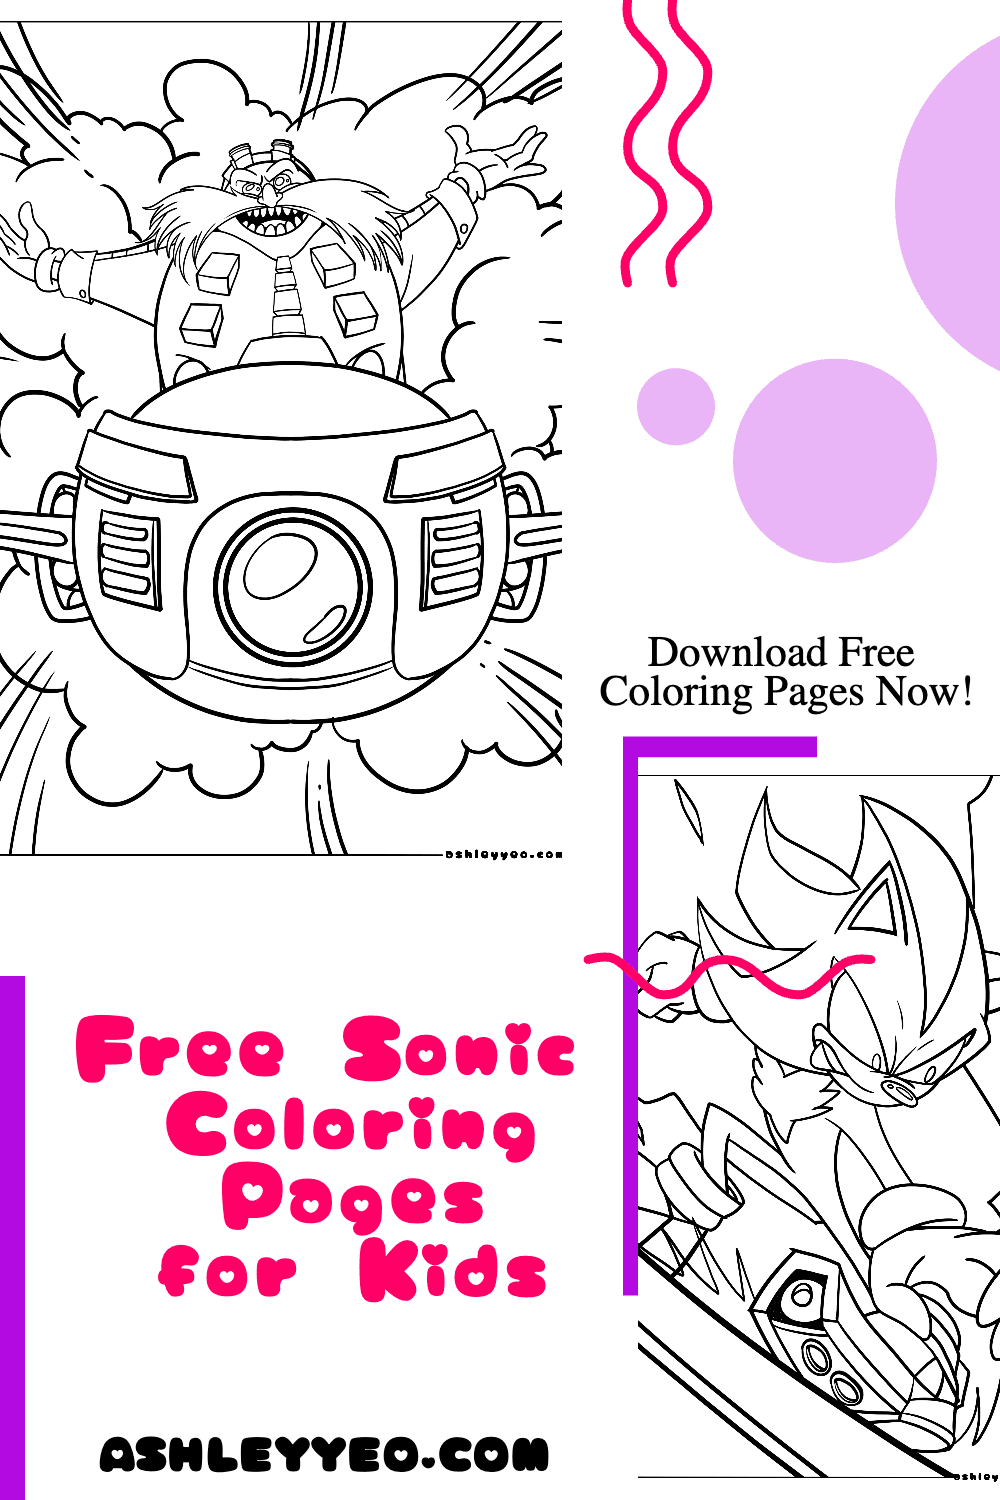 Amy Rose and Sonic Coloring Page - Free Printable Coloring Pages for Kids